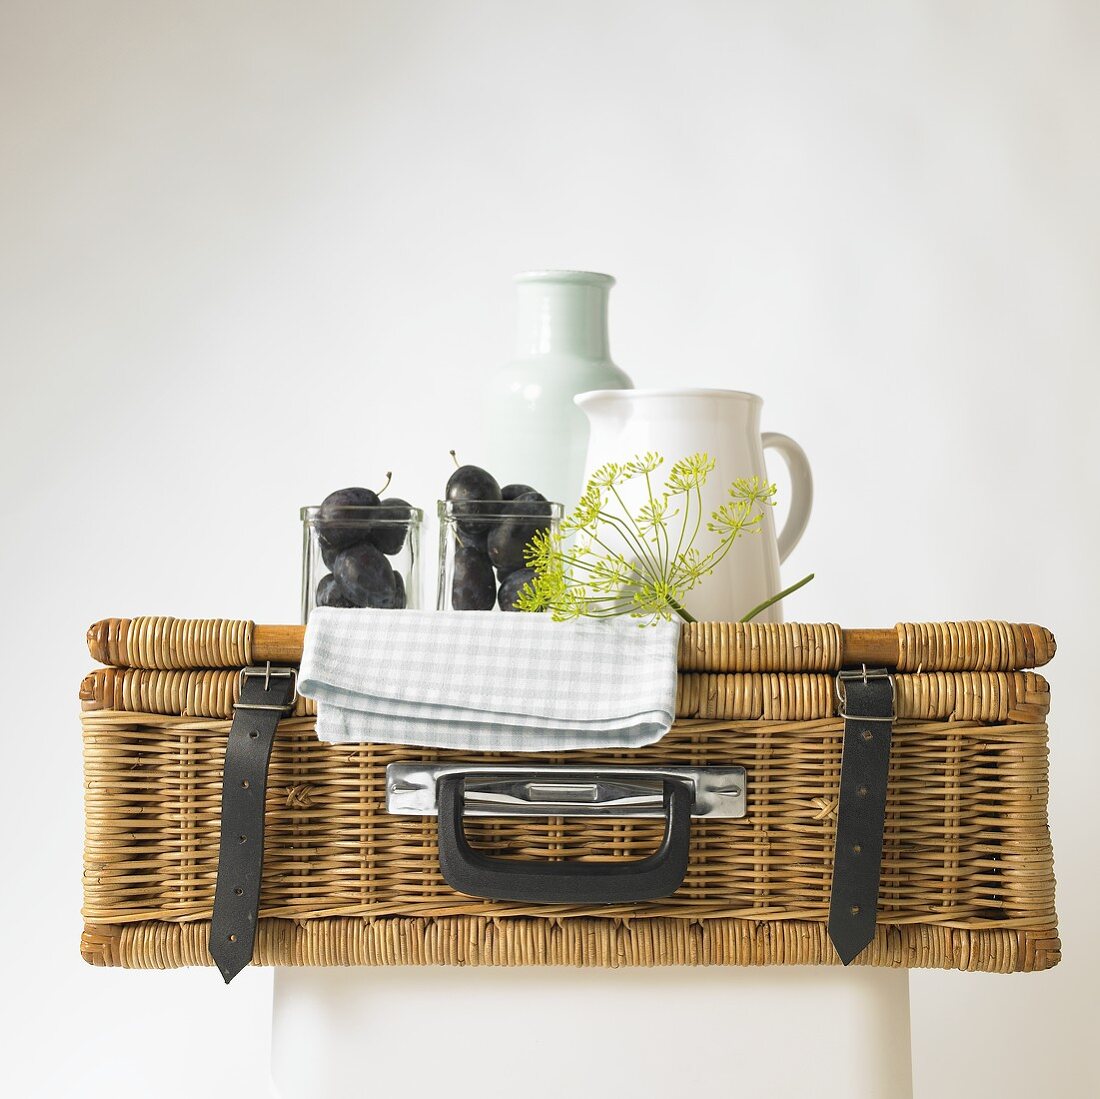 A picnic basket with plums, dill flowers and a porcelain jug